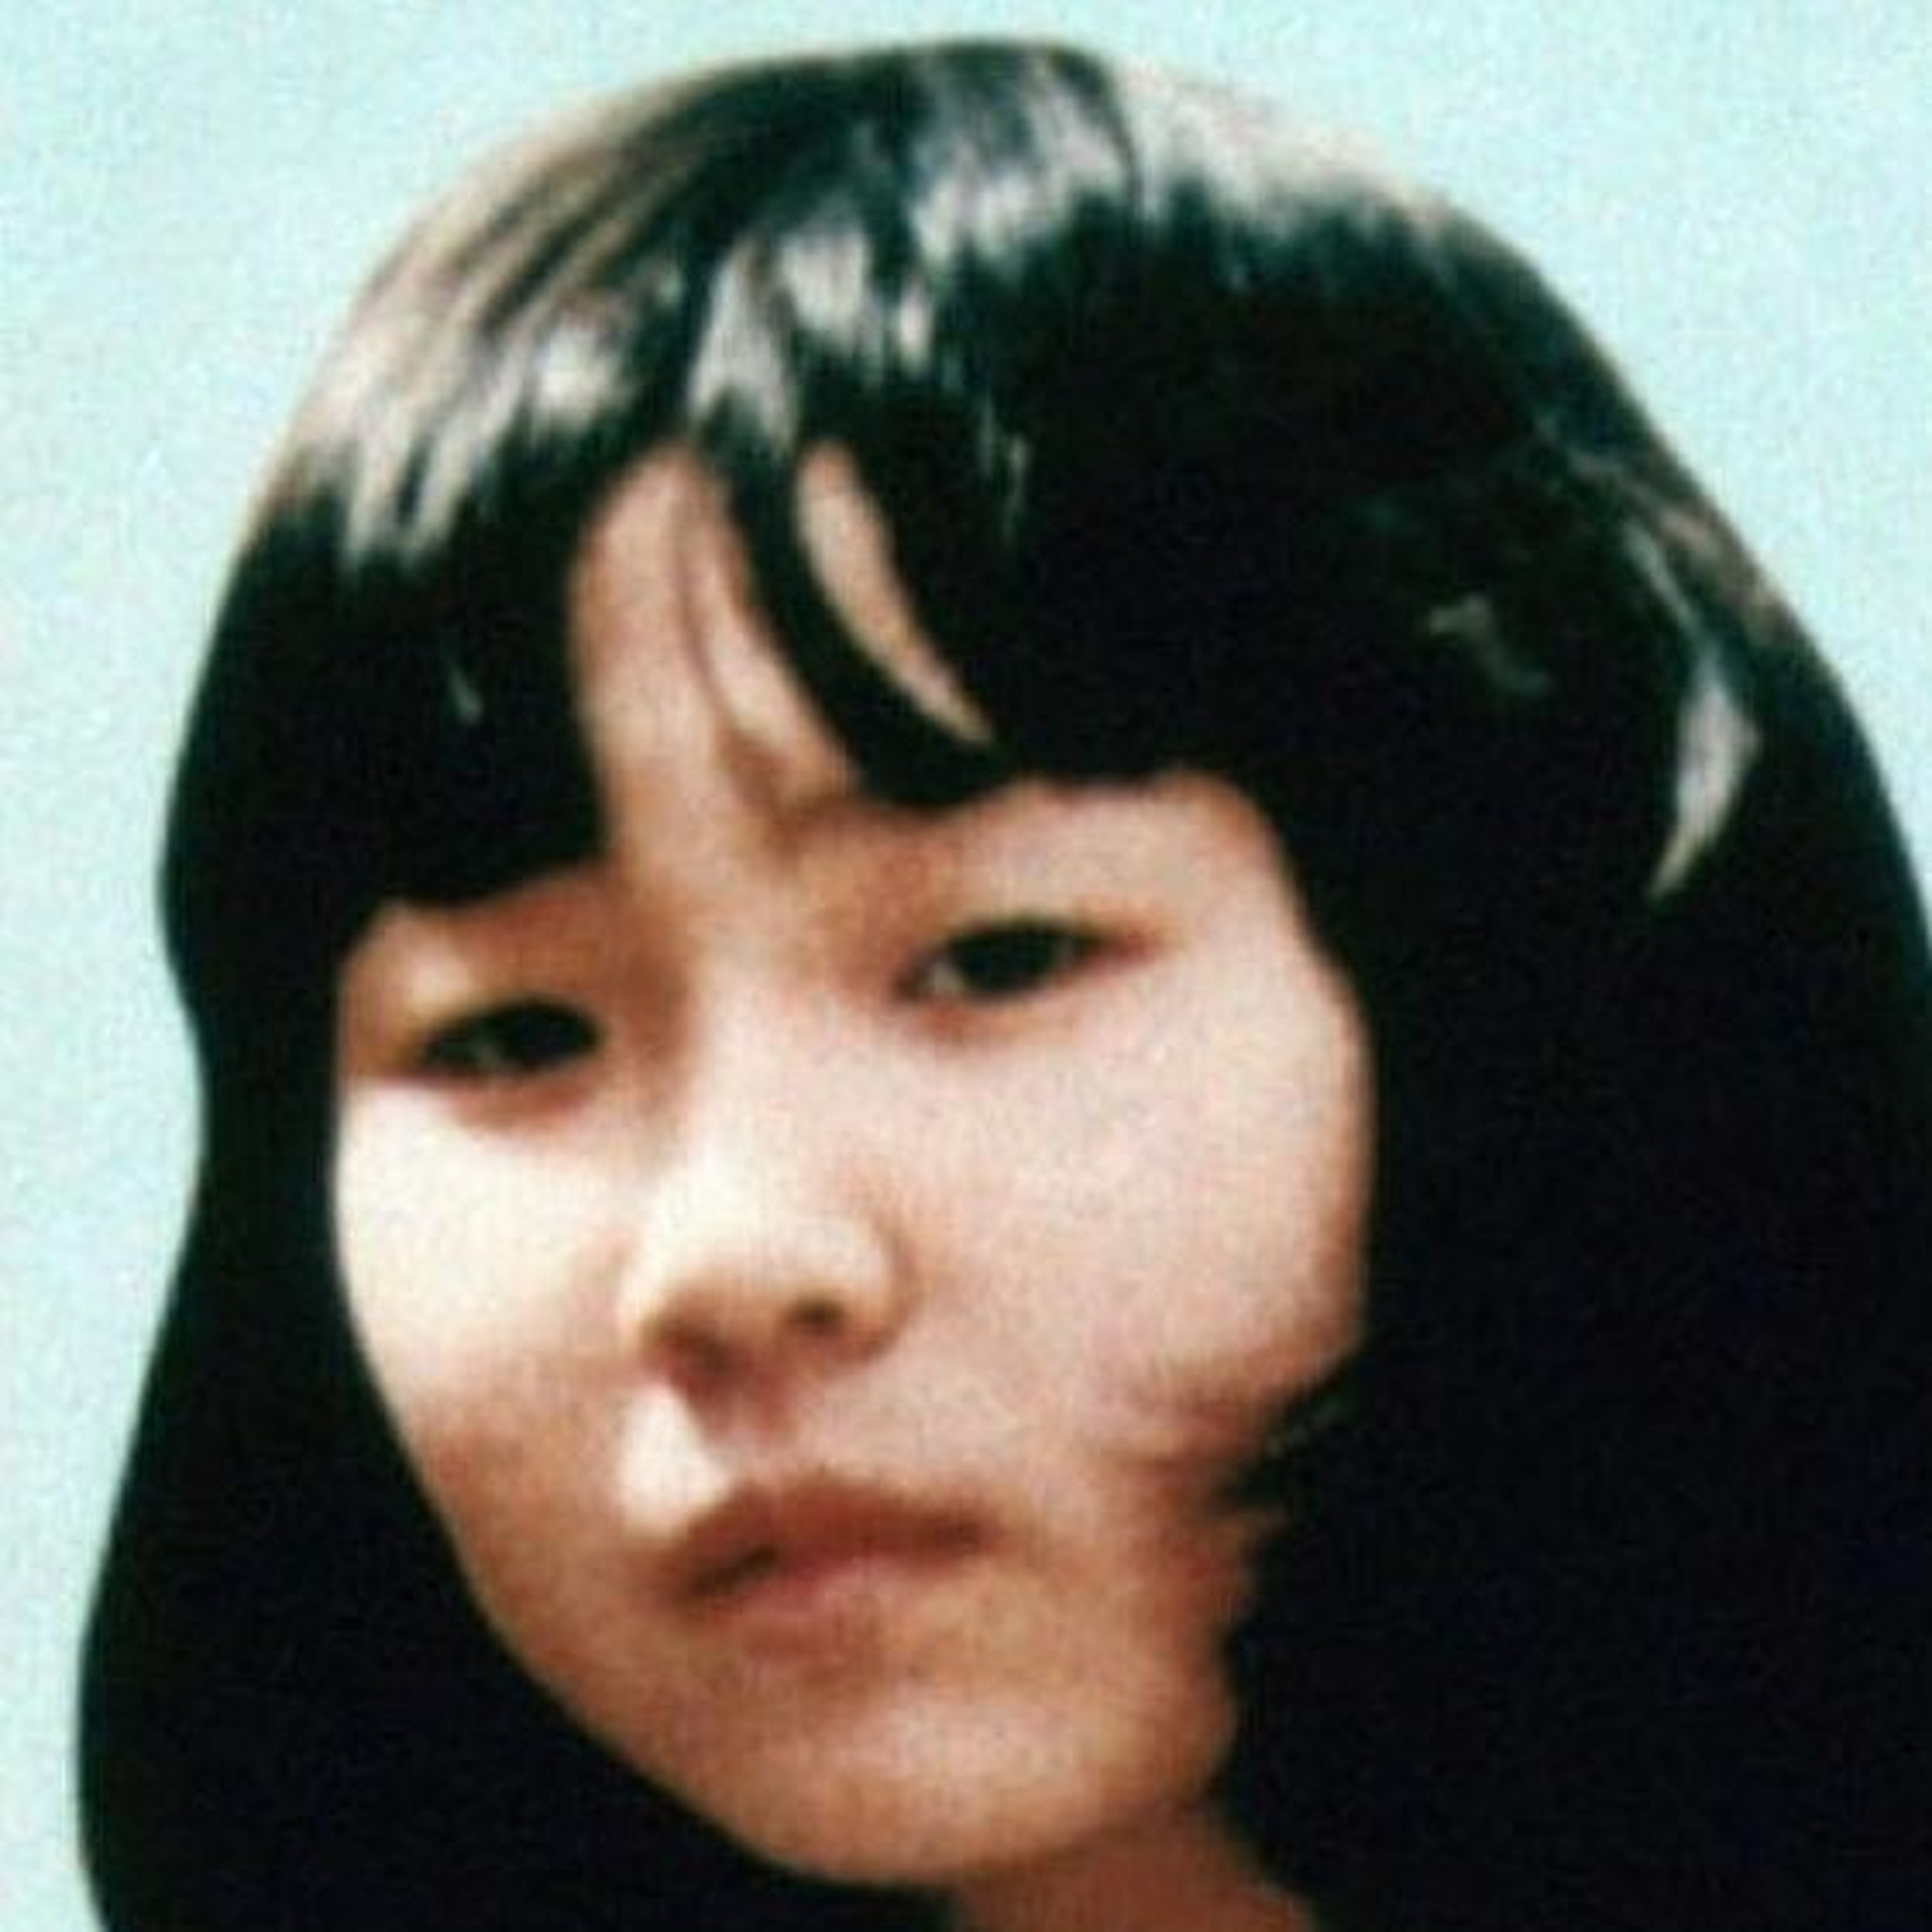 Episode 56: The Abduction of Megumi Yokota, Part One -- Taking Everyone Who Isn’t Nailed Down